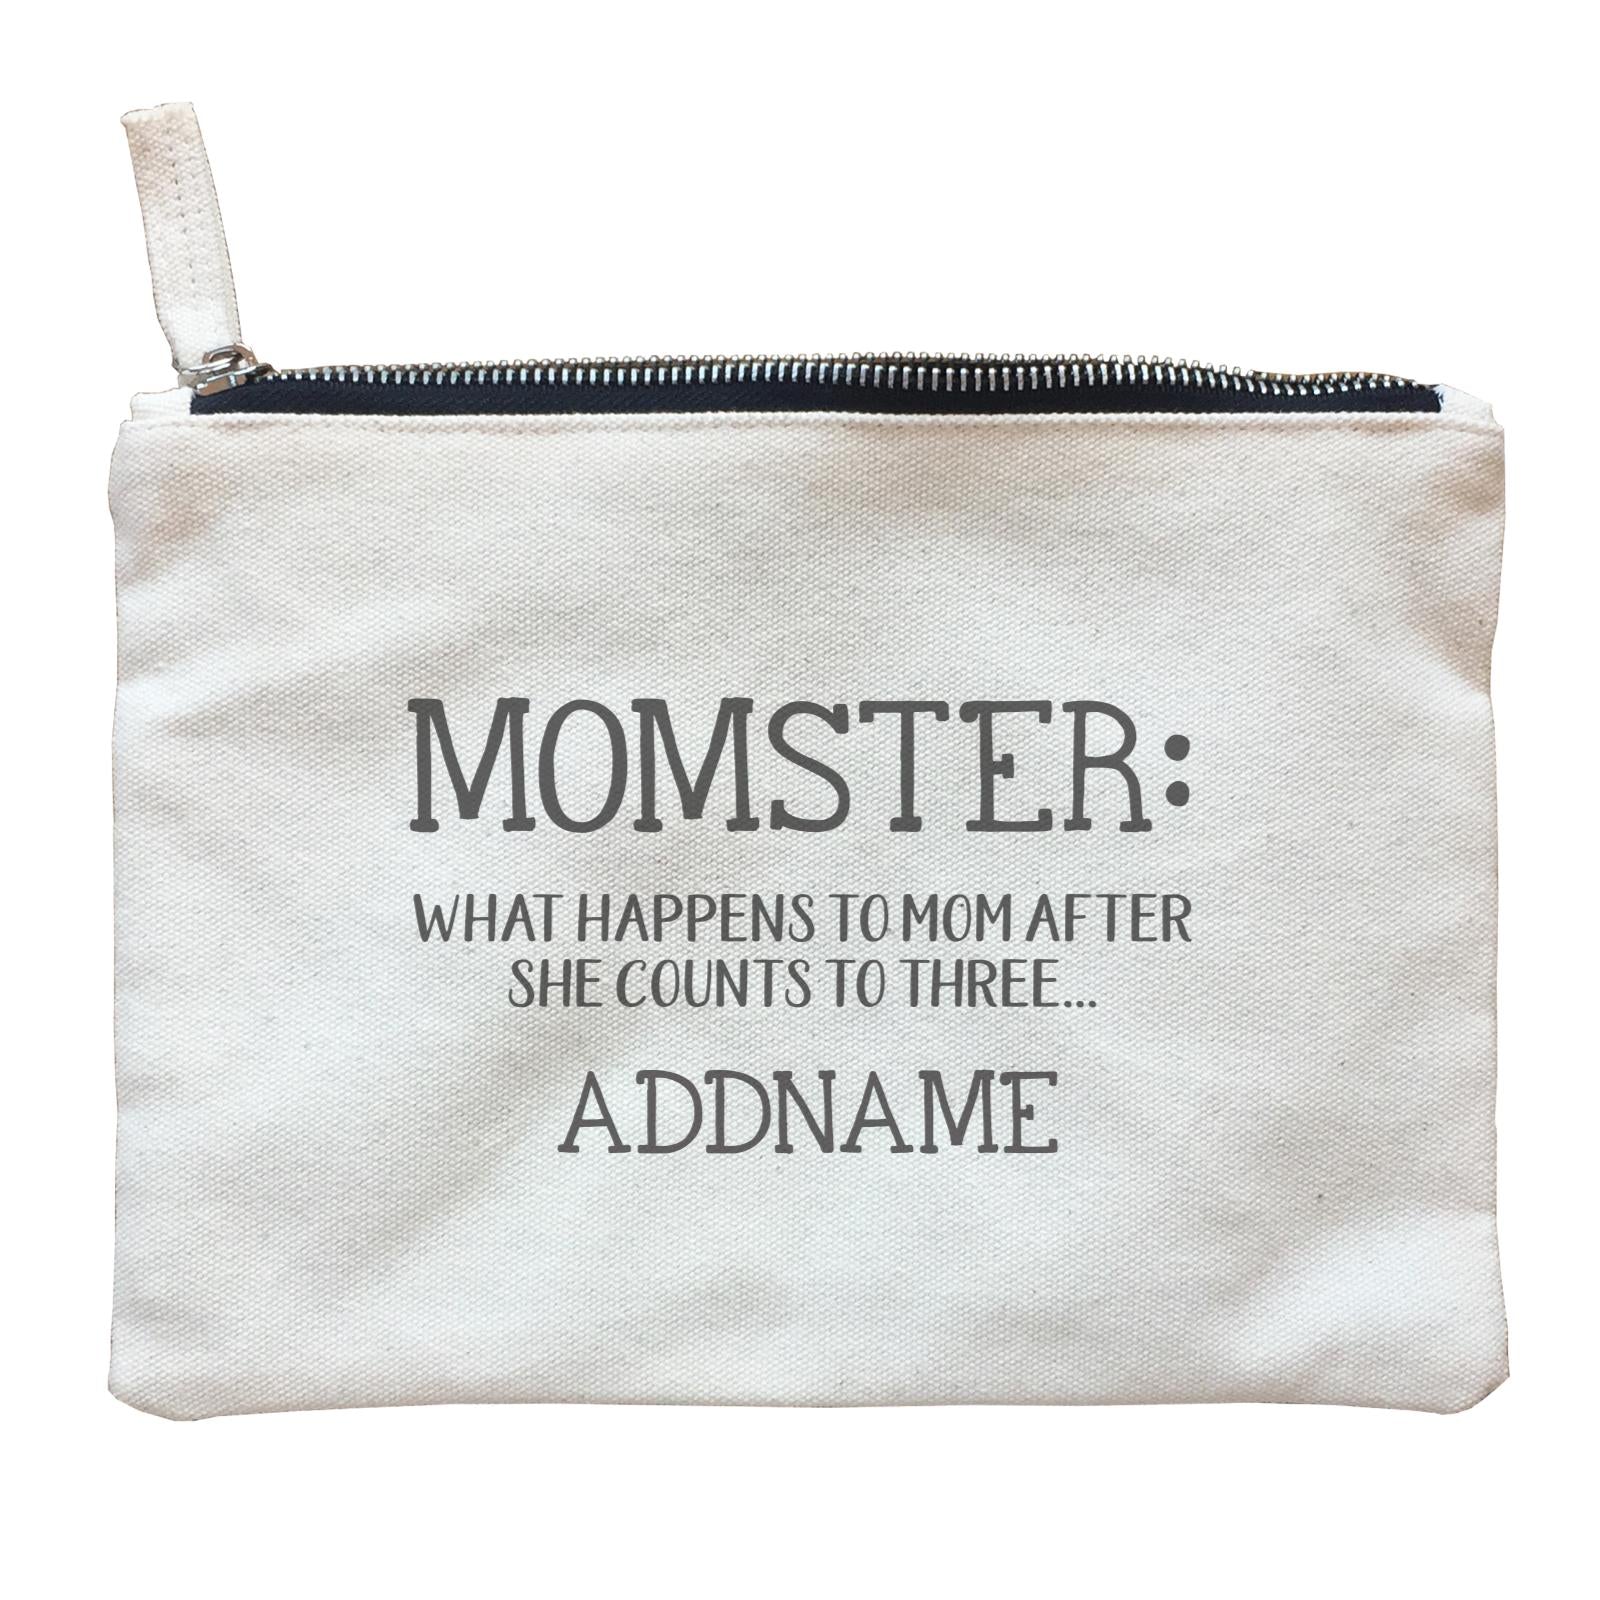 Funny Mom Quotes Momster What Happens To Mom After She Counts to Three Addname Accessories Zipper Pouch